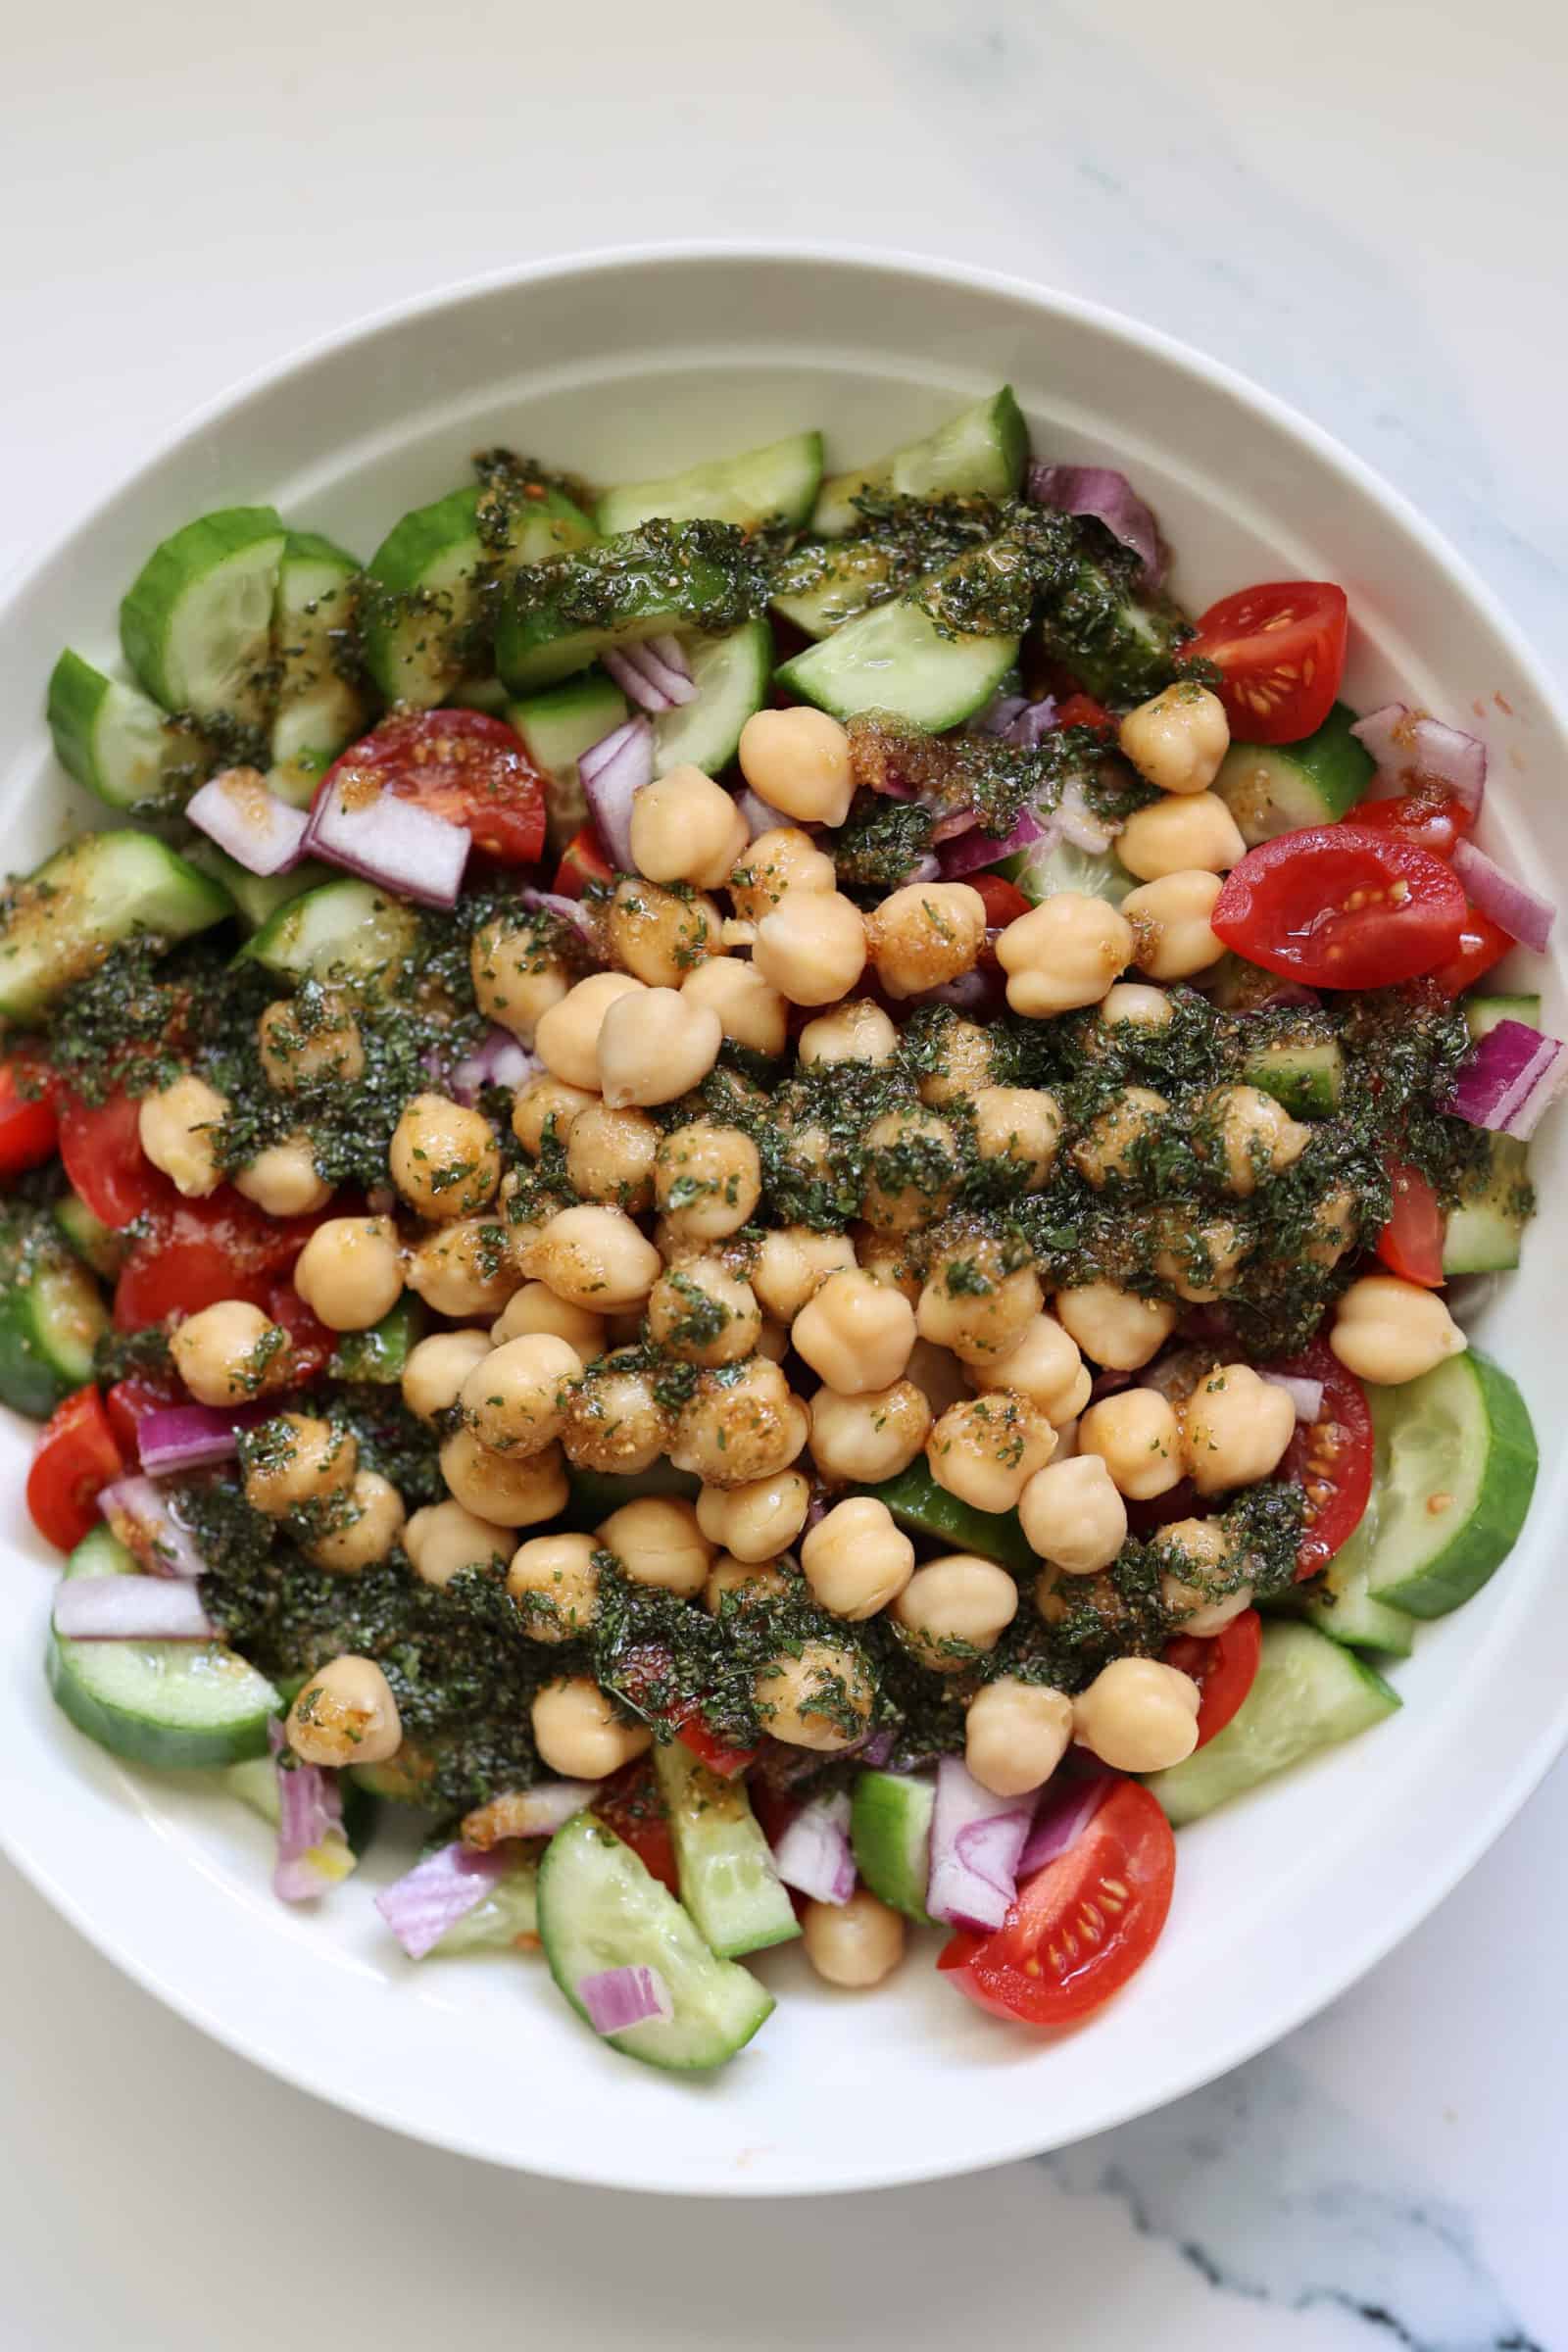 tomatoes, cucumber, chickpeas, red onions tossed with dressing